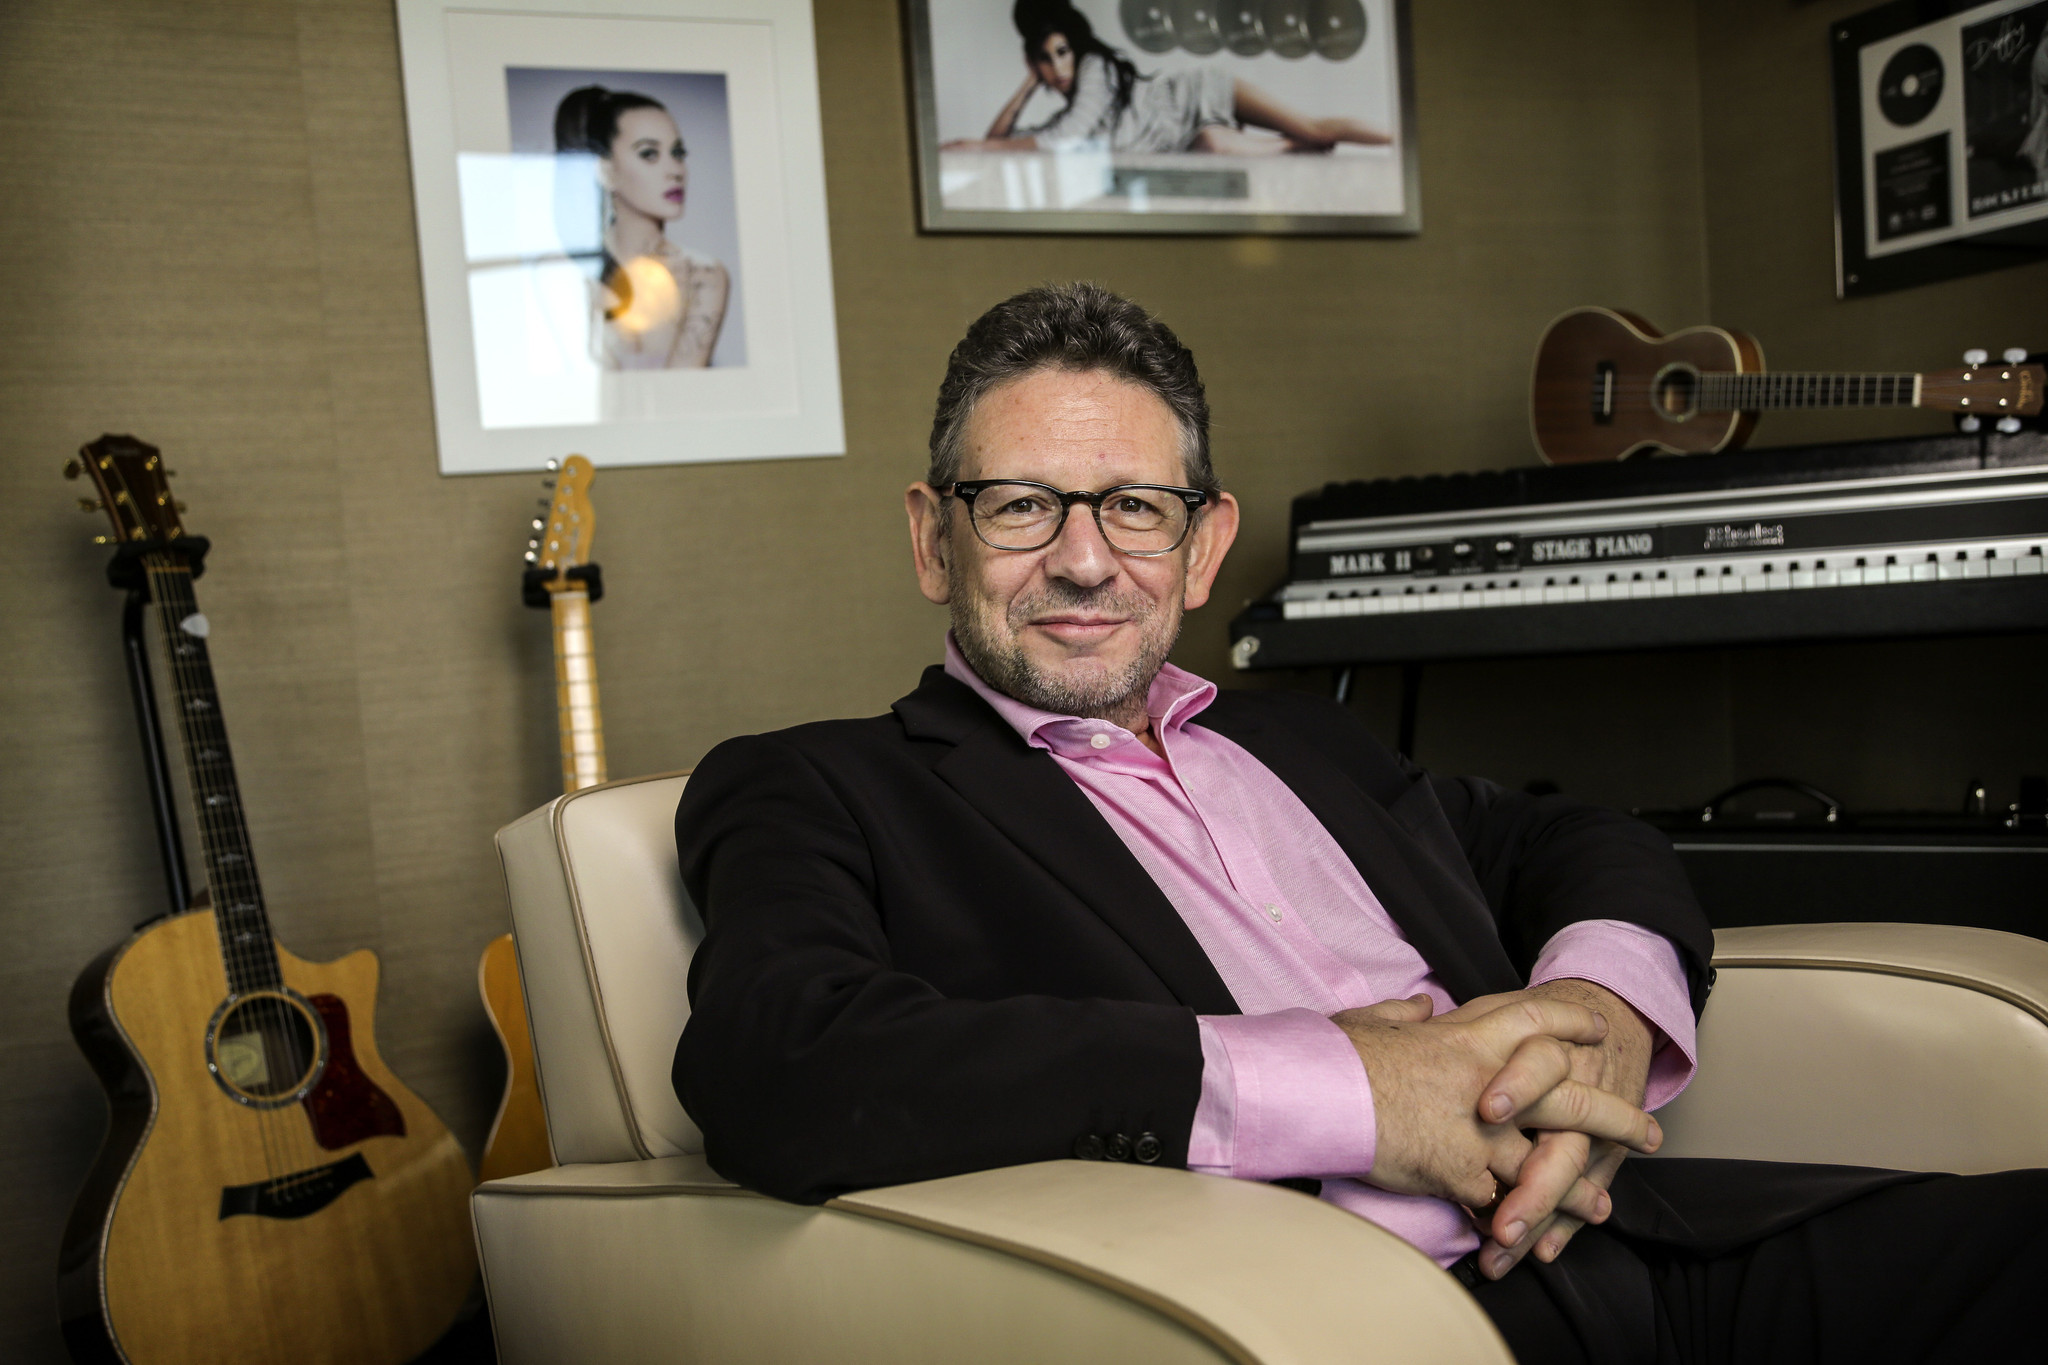 Streaming “needs our help” says newly knighted UMG CEO Sir Lucian Grainge